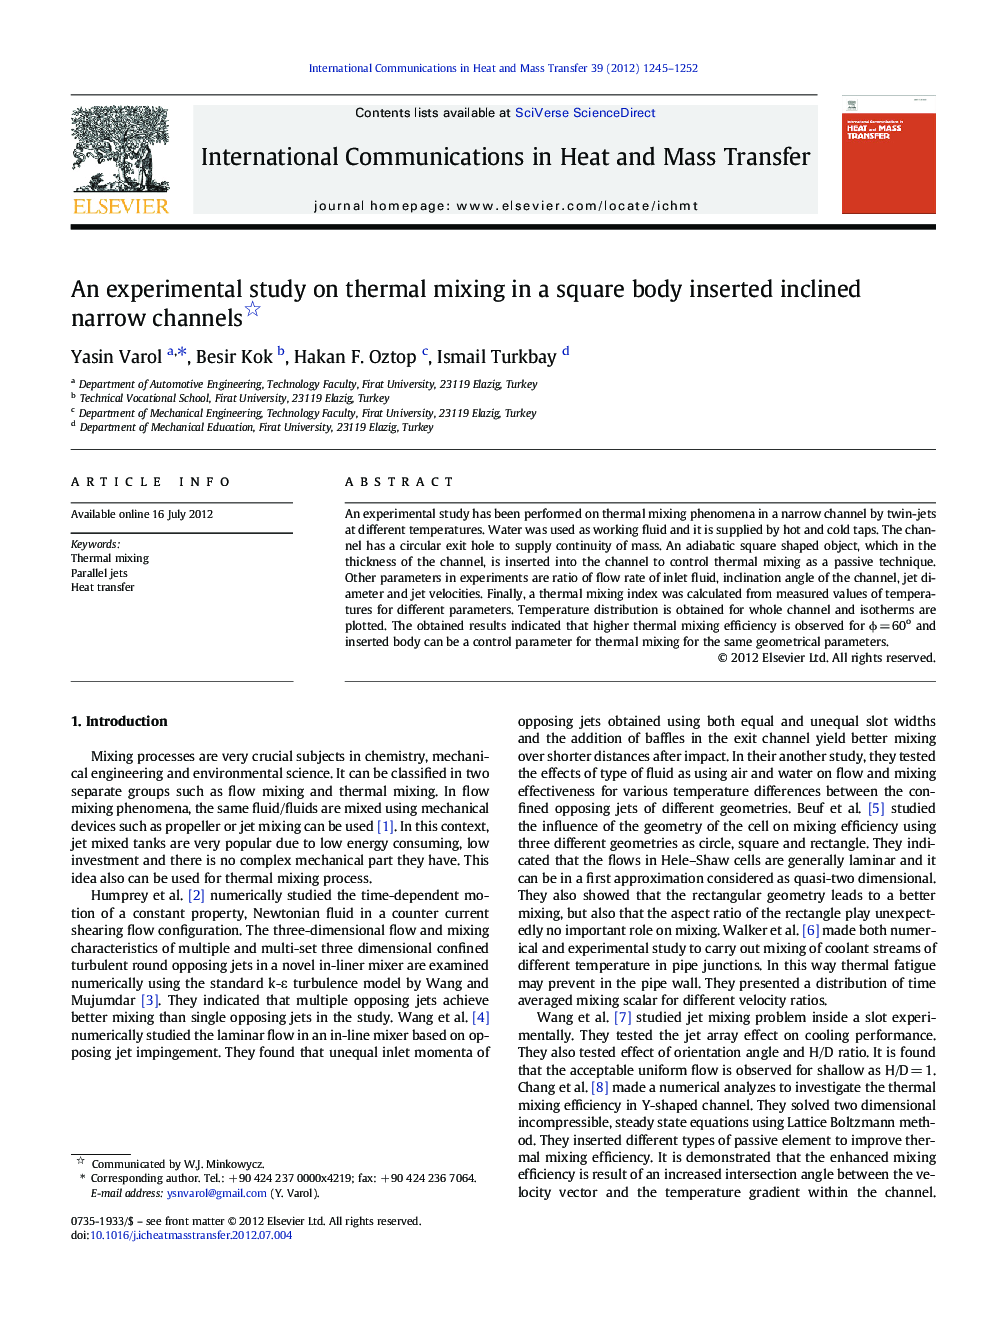 An experimental study on thermal mixing in a square body inserted inclined narrow channels